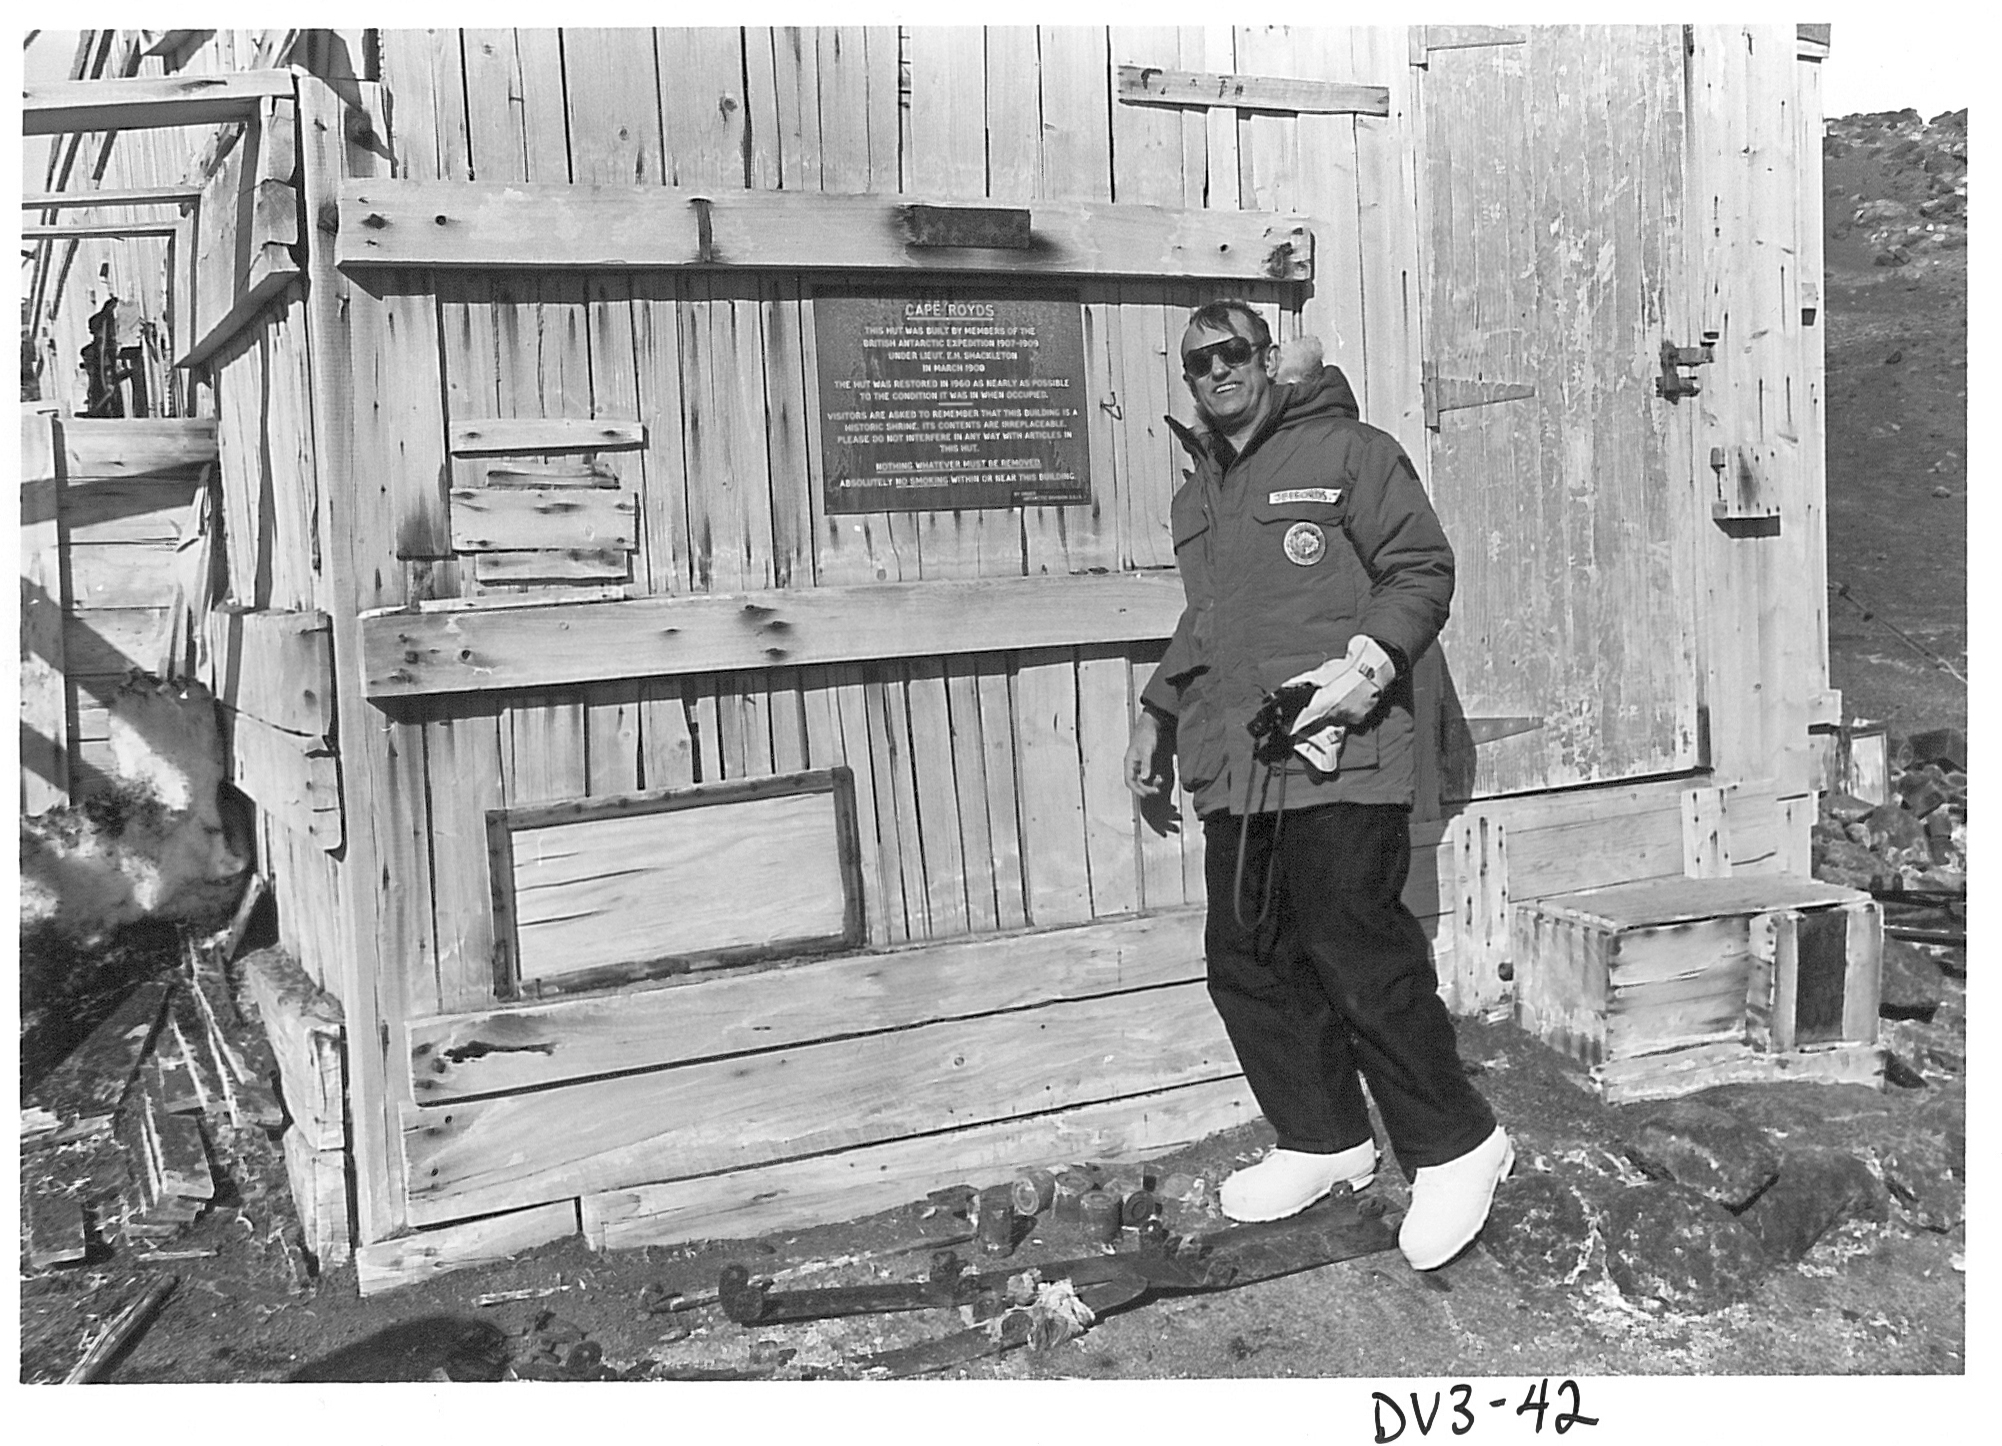 Wearing cold-weather gear a man stands outside a wooden building.